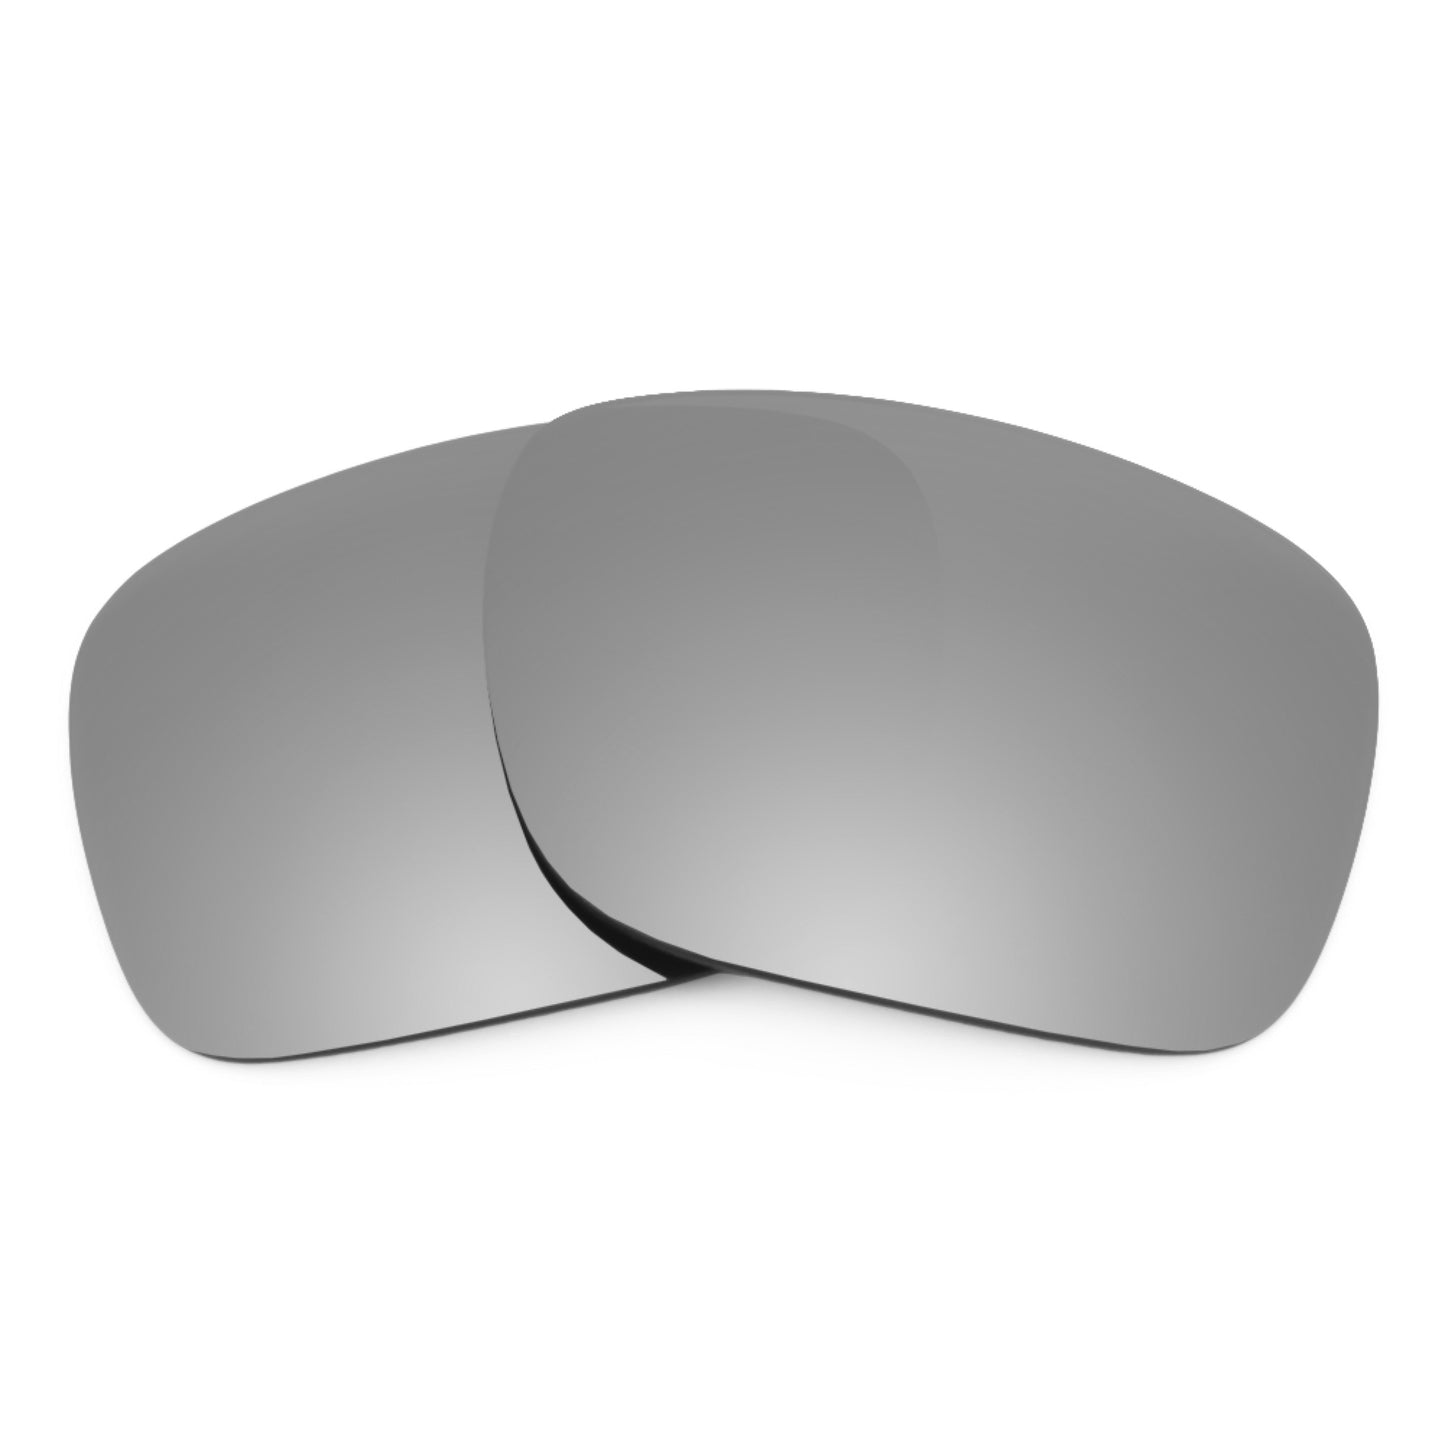 Revant replacement lenses for Ray-Ban Drifter (B&L) 56mm Non-Polarized Titanium